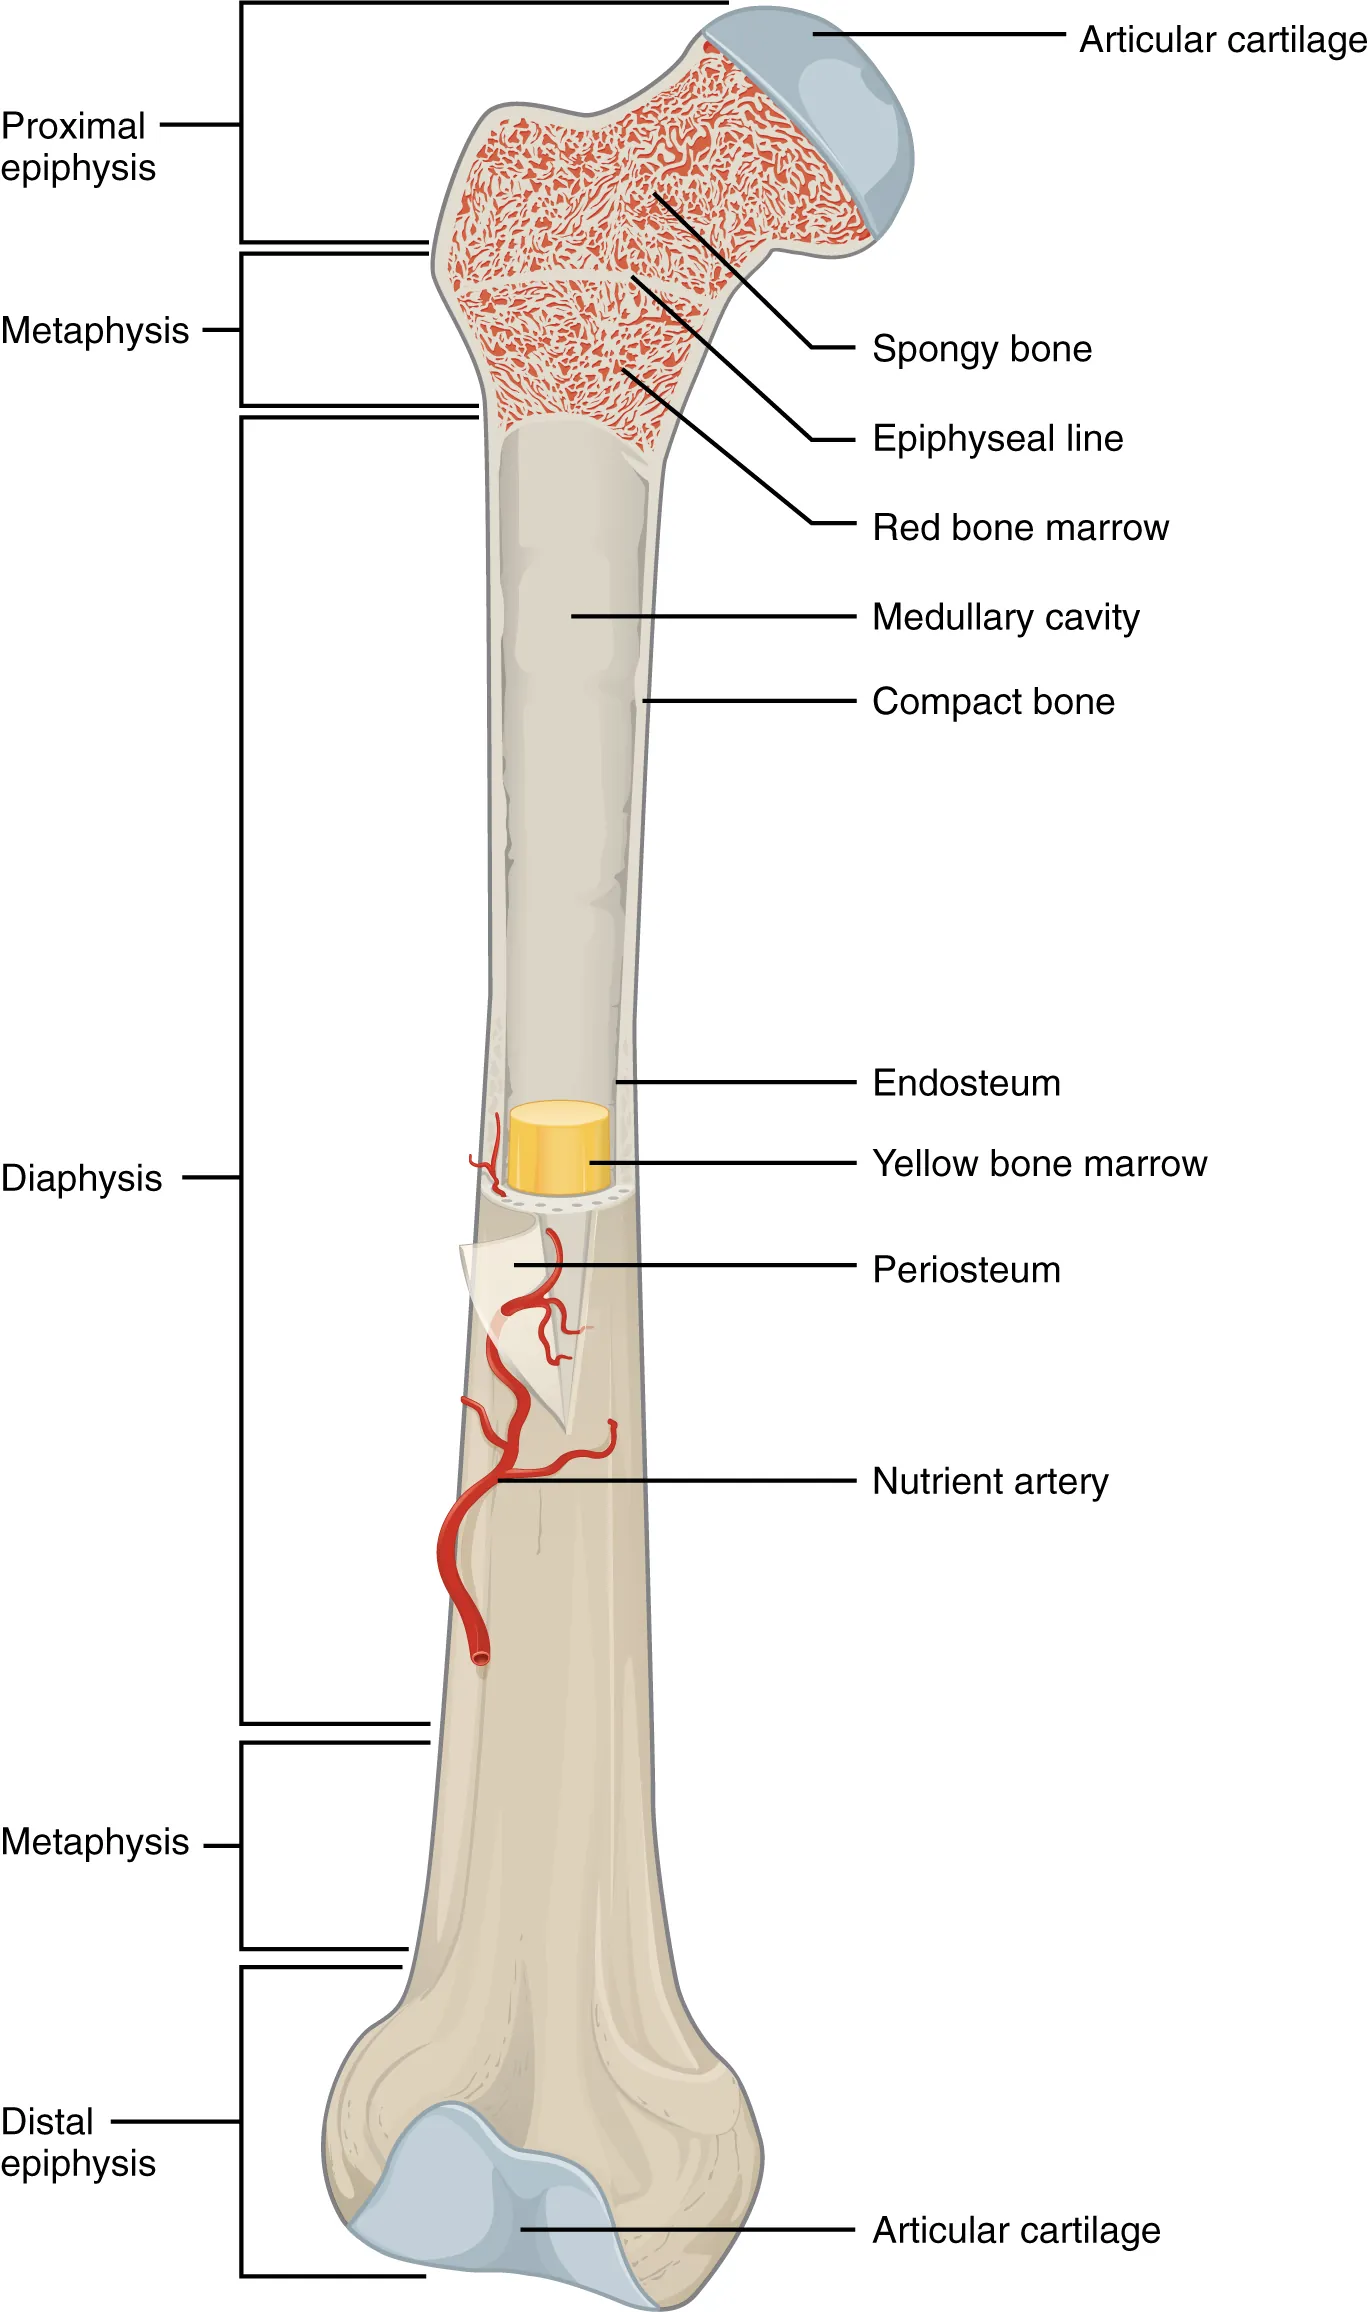 This illustration depicts an anterior view of the right femur, or thigh bone. The inferior end that connects to the knee is at the bottom of the diagram and the superior end that connects to the hip is at the top of the diagram. The bottom end of the bone contains a smaller lateral bulge and a larger medial bulge. A blue articular cartilage covers the inner half of each bulge as well as the small trench that runs between the bulges. This area of the inferior end of the bone is labeled the distal epiphysis. Above the distal epiphysis is the metaphysis, where the bone tapers from the wide epiphysis into the relatively thin shaft. The entire length of the shaft is the diaphysis. The superior half of the femur is cut away to show its internal contents. The bone is covered with an outer translucent sheet called the periosteum. At the midpoint of the diaphysis, a nutrient artery travels through the periosteum and into the inner layers of the bone. The periosteum surrounds a white cylinder of solid bone labeled compact bone. The cavity at the center of the compact bone is called the medullary cavity. The inner layer of the compact bone that lines the medullary cavity is called the endosteum. Within the diaphysis, the medullary cavity contains a cylinder of yellow bone marrow that is penetrated by the nutrient artery. The superior end of the femur is also connected to the diaphysis by a metaphysis. In this upper metaphysis, the bone gradually widens between the diaphysis and the proximal epiphysis. The proximal epiphysis of the femur is roughly hexagonal in shape. However, the upper right side of the hexagon has a large, protruding knob. The femur connects and rotates within the hip socket at this knob. The knob is covered with a blue colored articular cartilage. The internal anatomy of the upper metaphysis and proximal epiphysis are revealed. The medullary cavity in these regions is filled with the mesh like spongy bone. Red bone marrow occupies the many cavities within the spongy bone. There is a clear, white line separating the spongy bone of the upper metaphysis with that of the proximal epiphysis. This line is labeled the epiphyseal line.